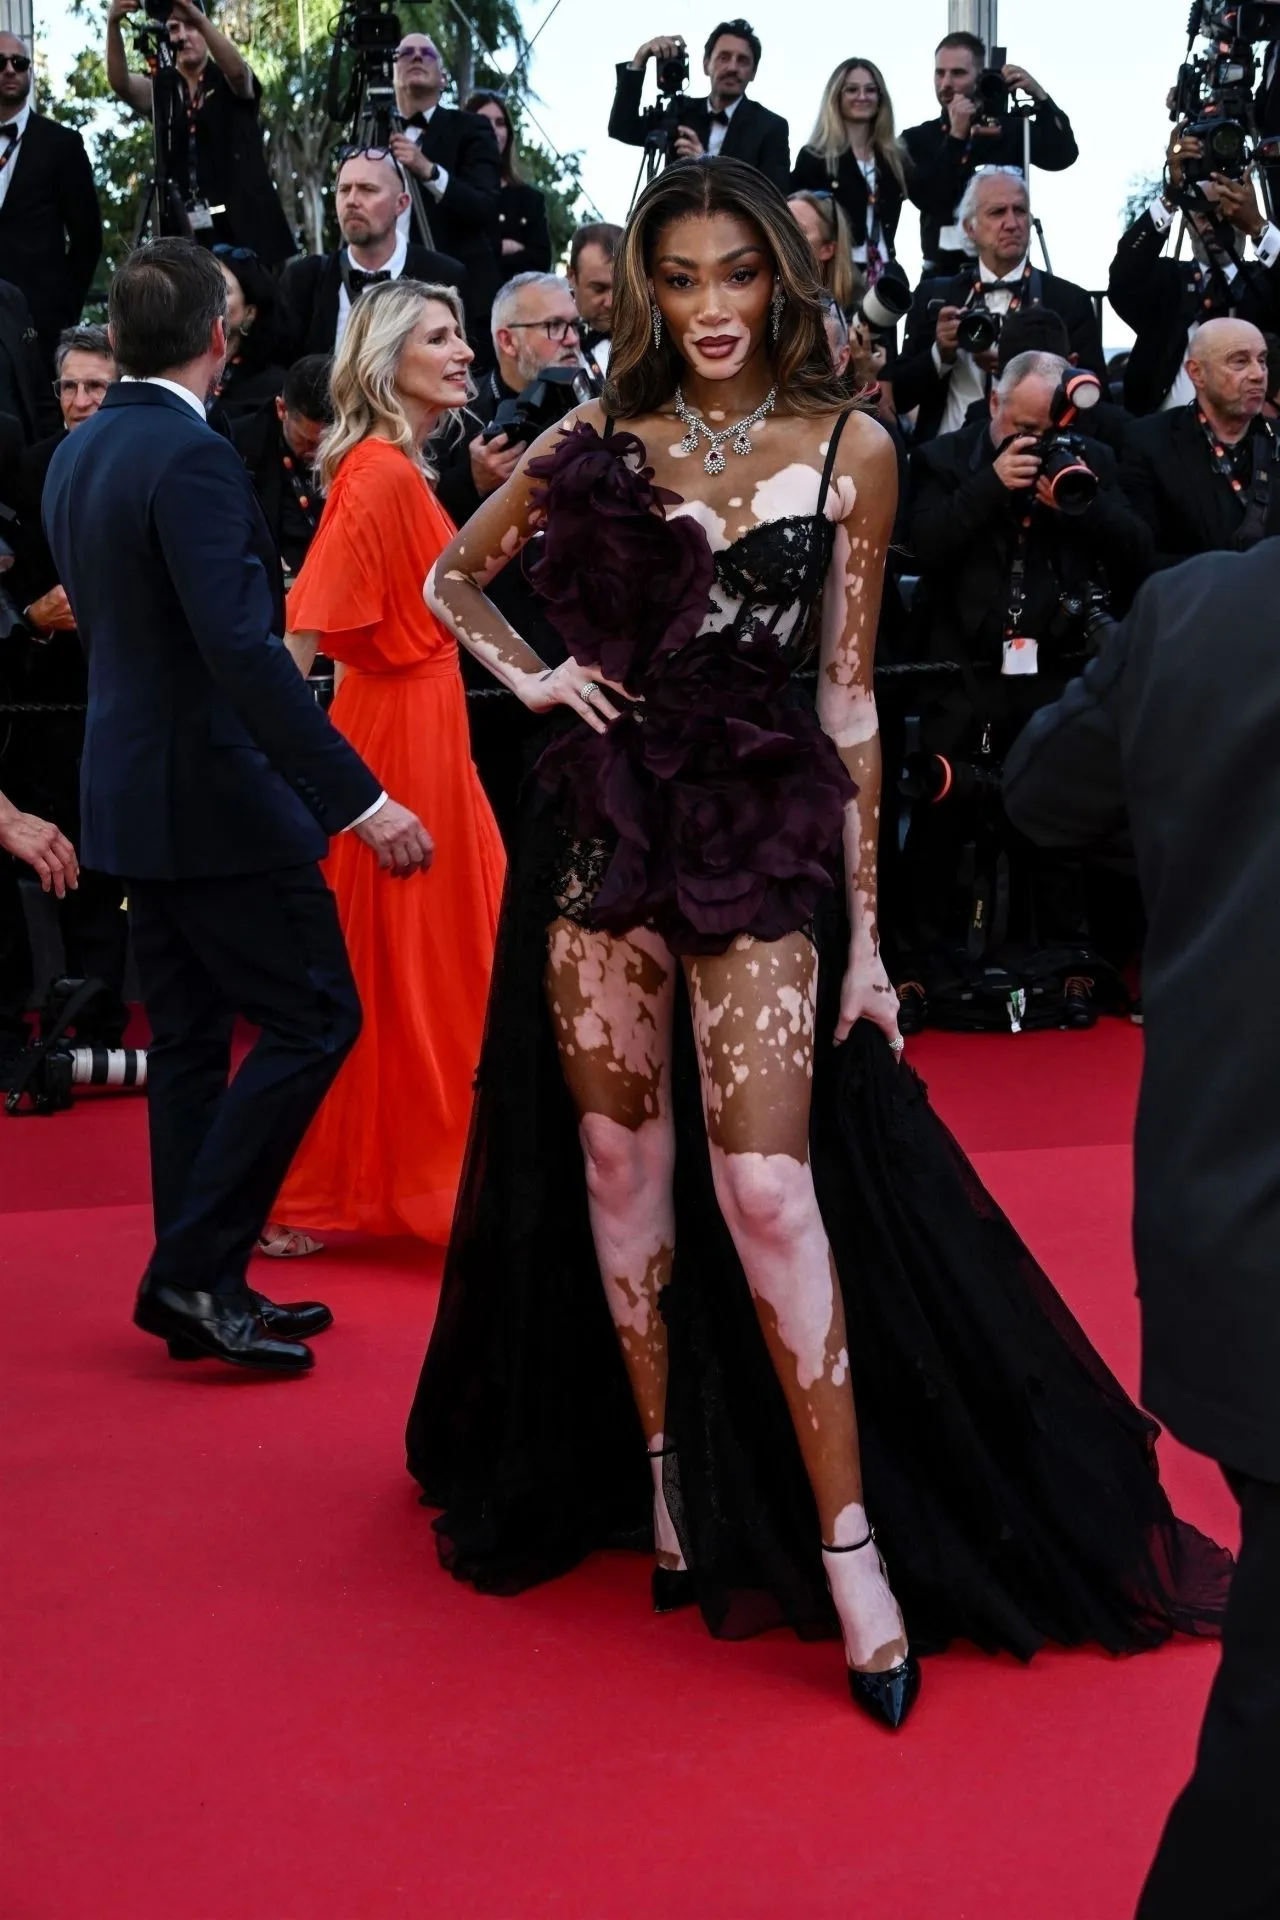 WINNIE HARLOW AT THE COUNT OF MONTE CRISTO PREMIERE AT CANNES FILM FESTIVAL1